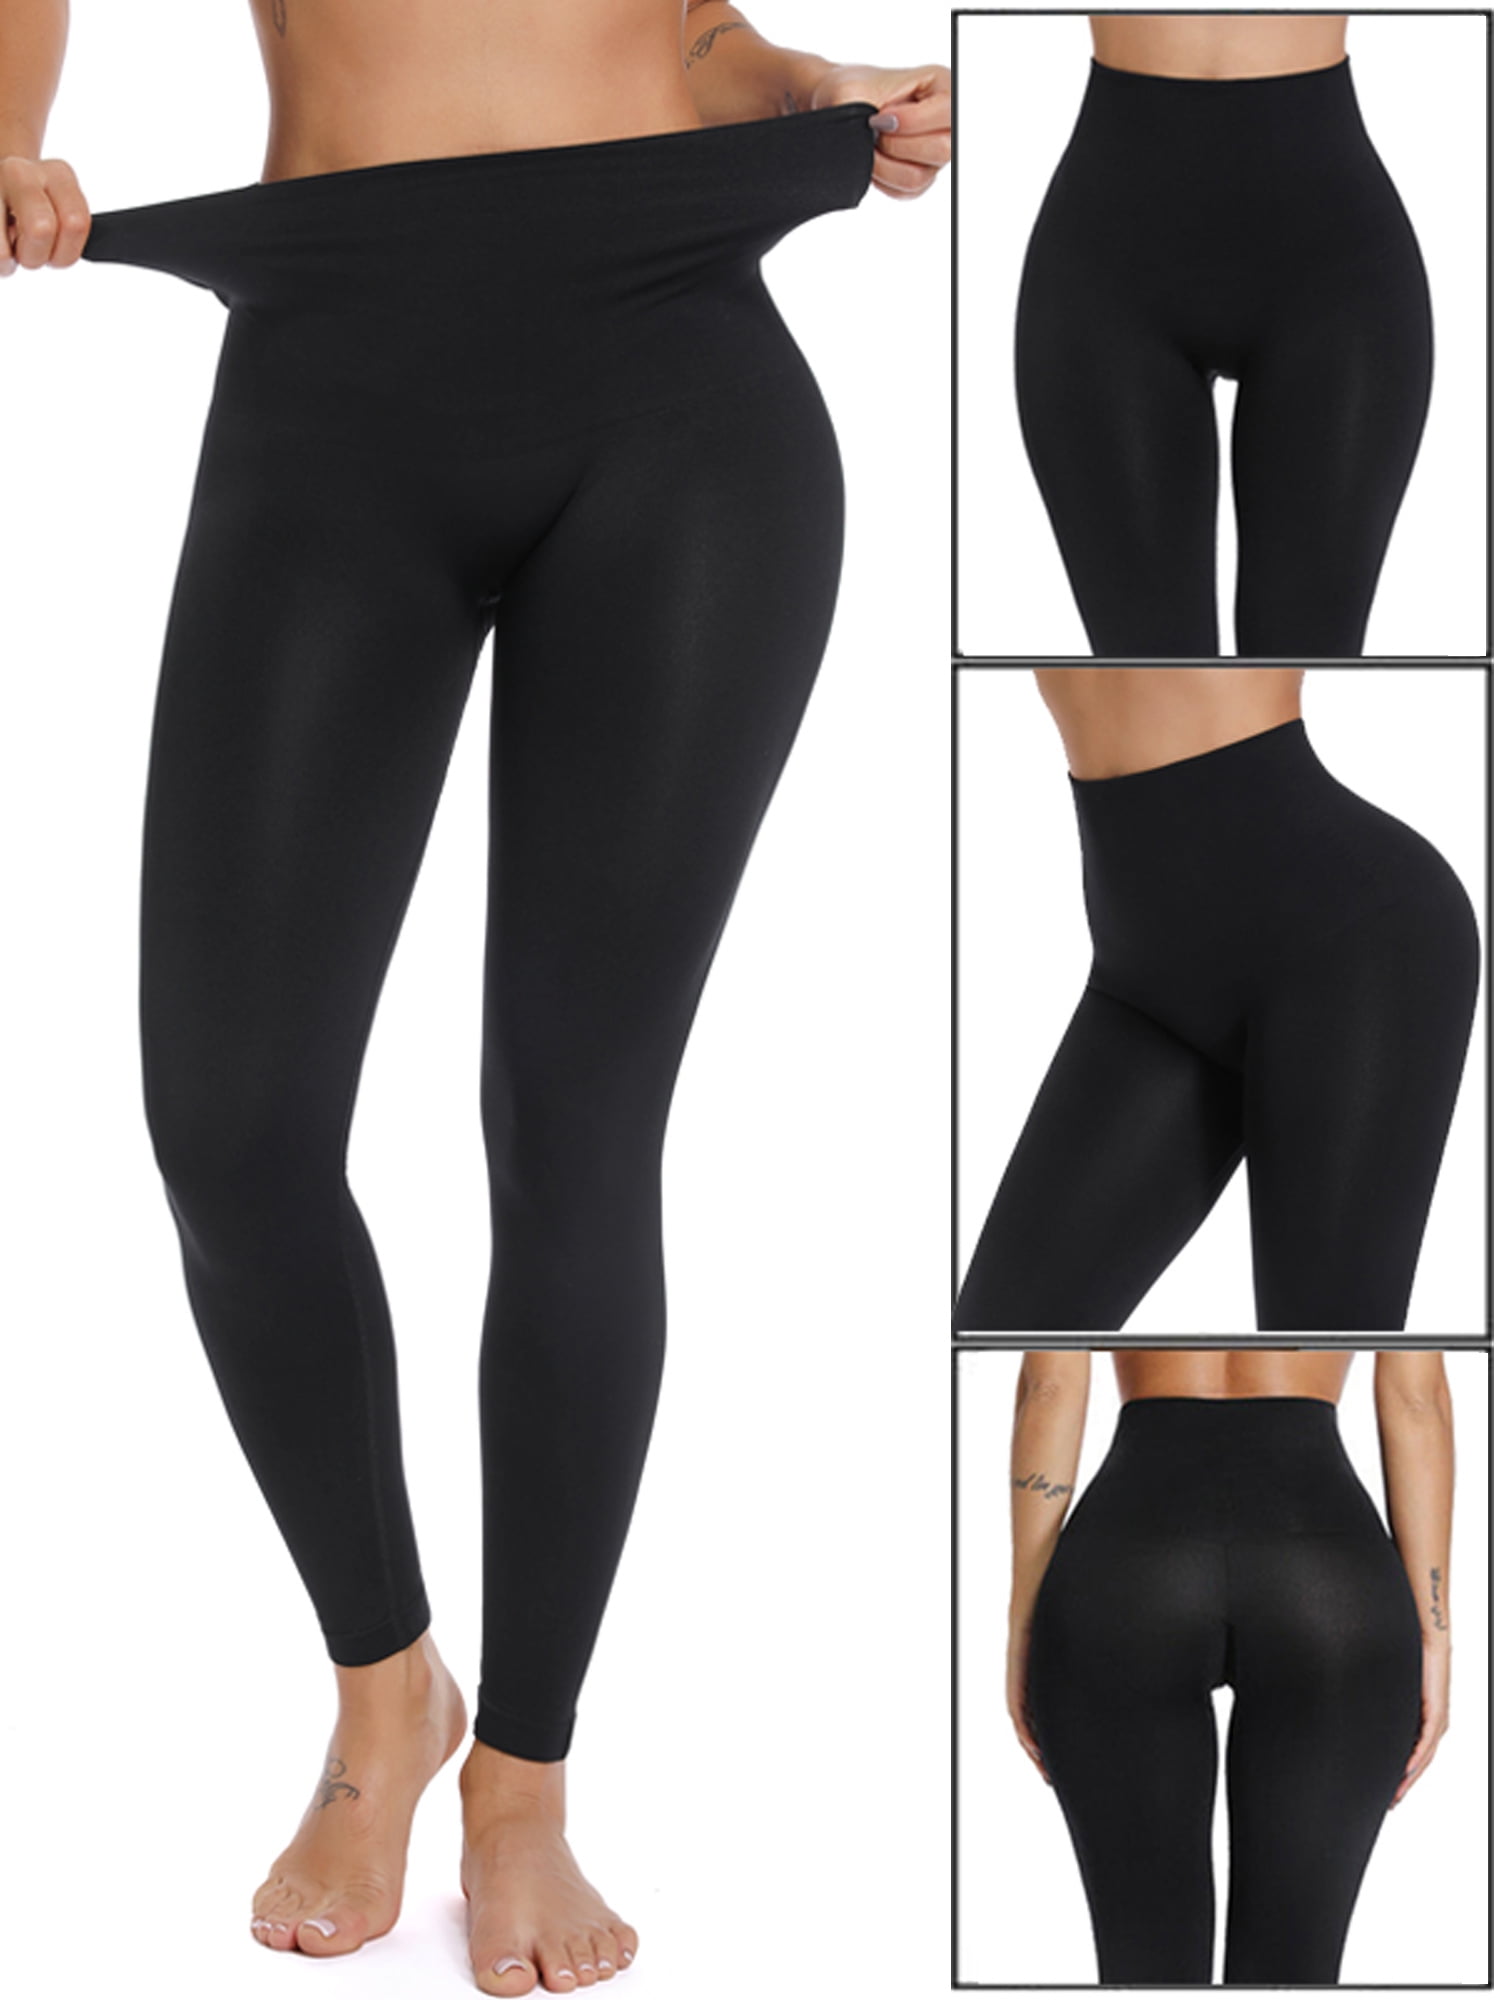 FITVALEN Seamless High Waisted Compression Leggings Anti-Cellulite Push Up  GYM Shapewear Pants for Women Fitness 